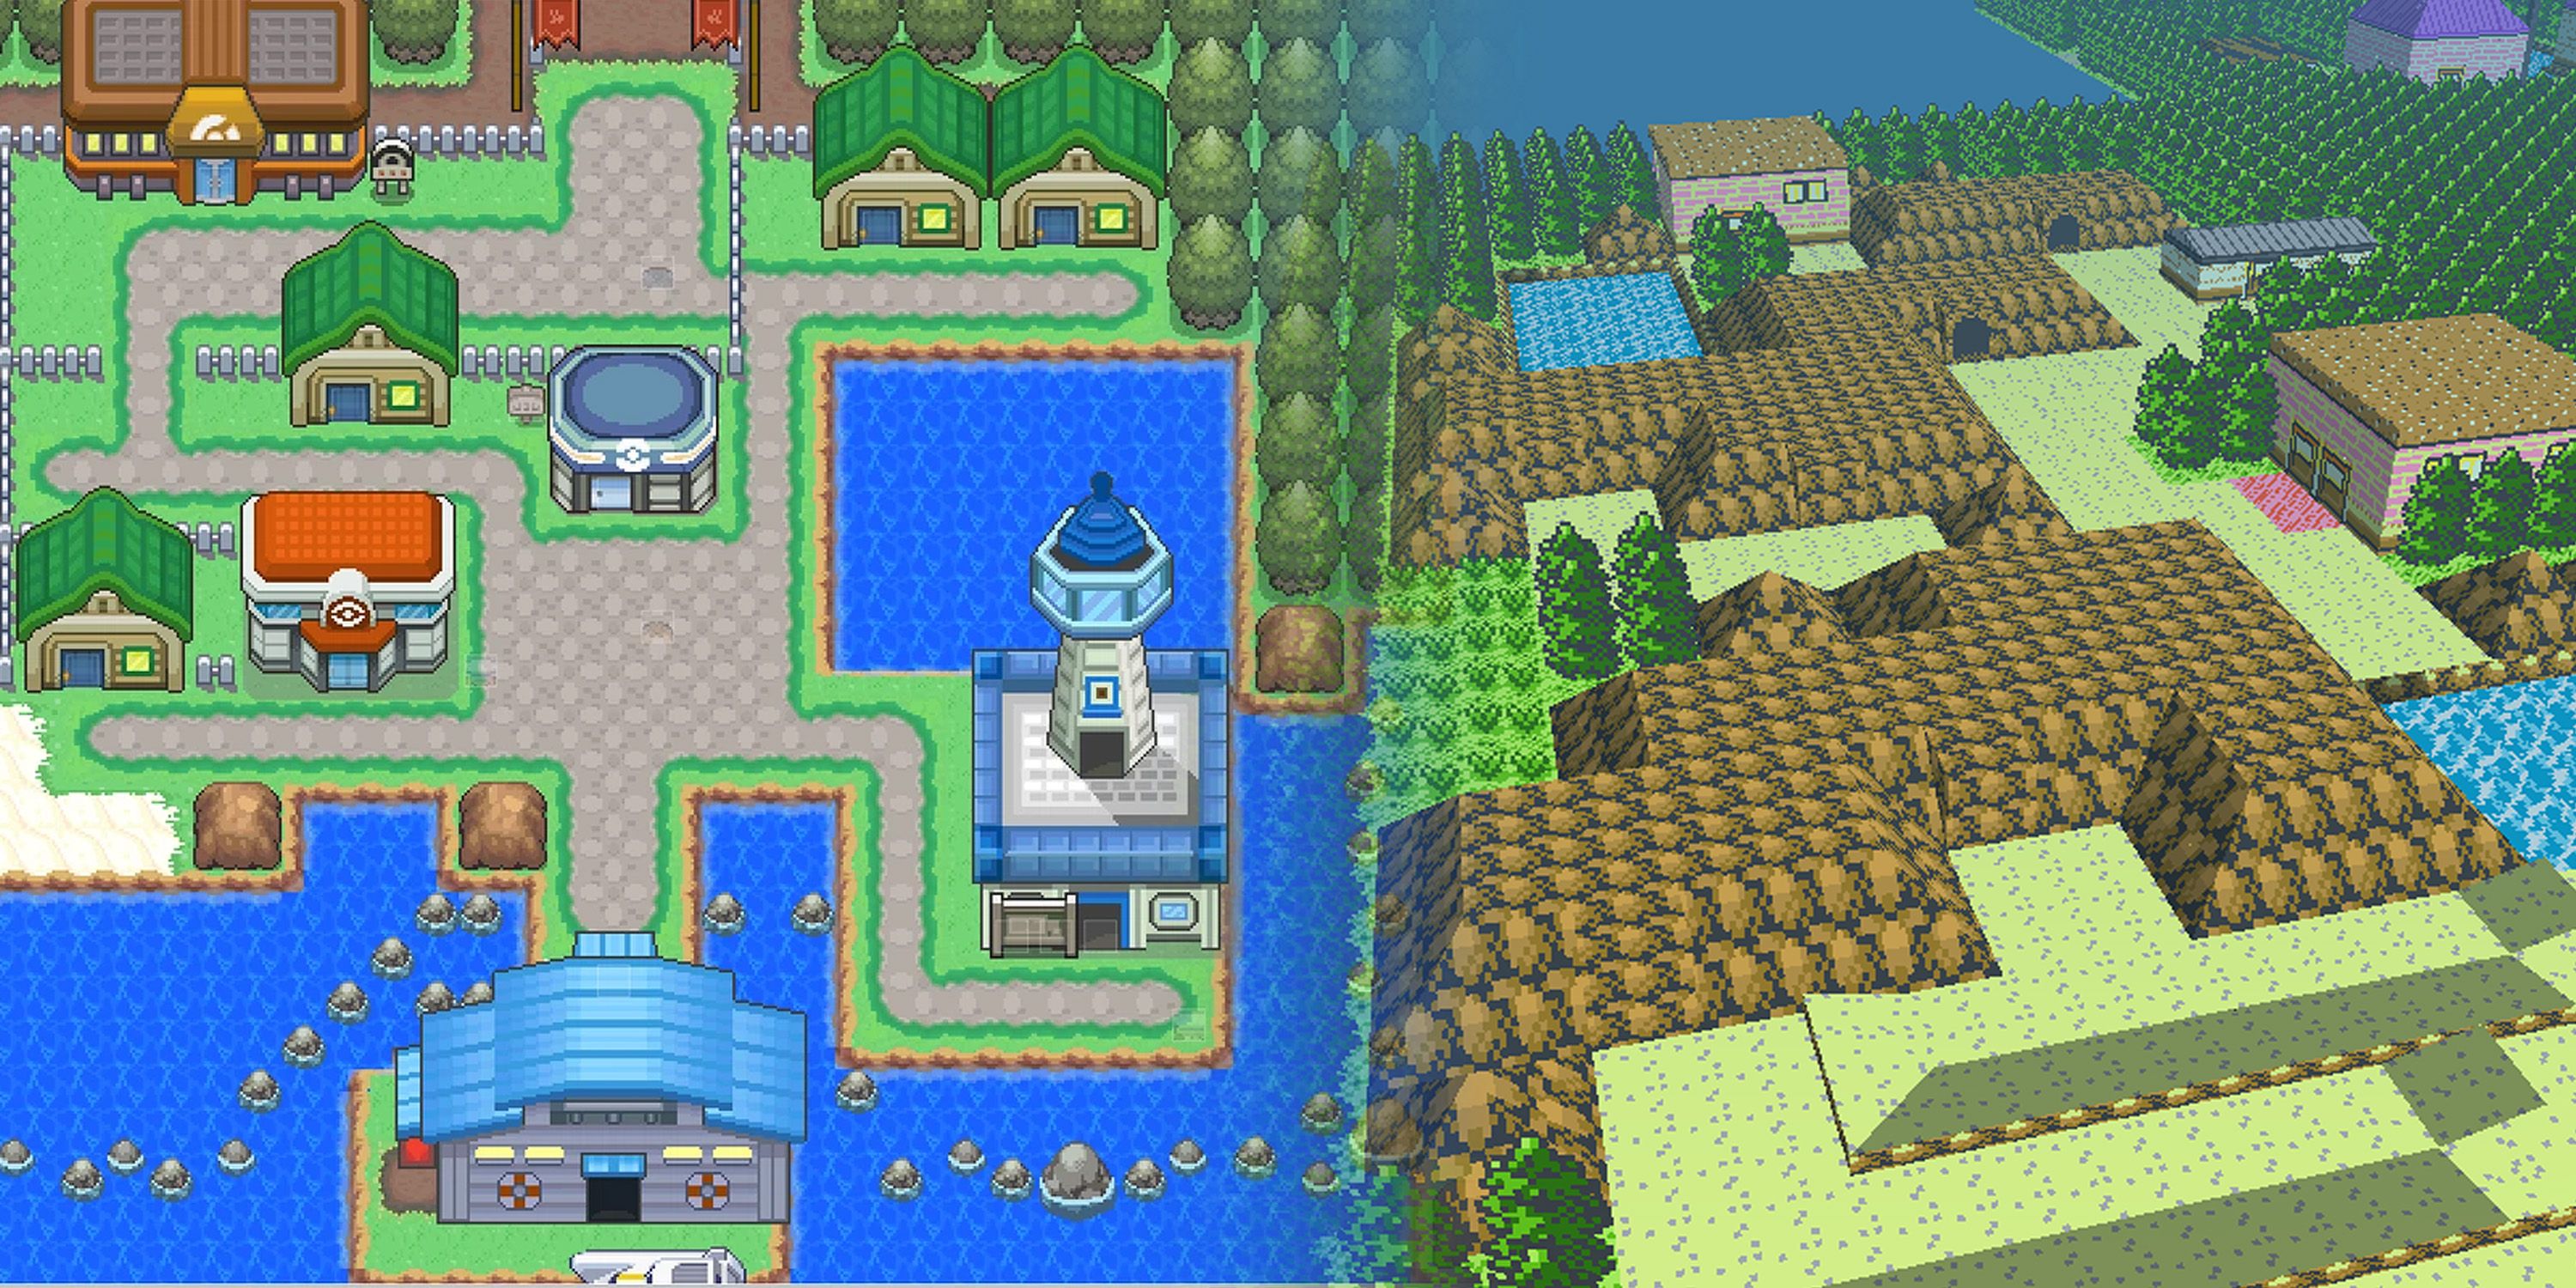 Shocking Facts You Didn't Know About Pokémon Gold, Silver, And Crystal